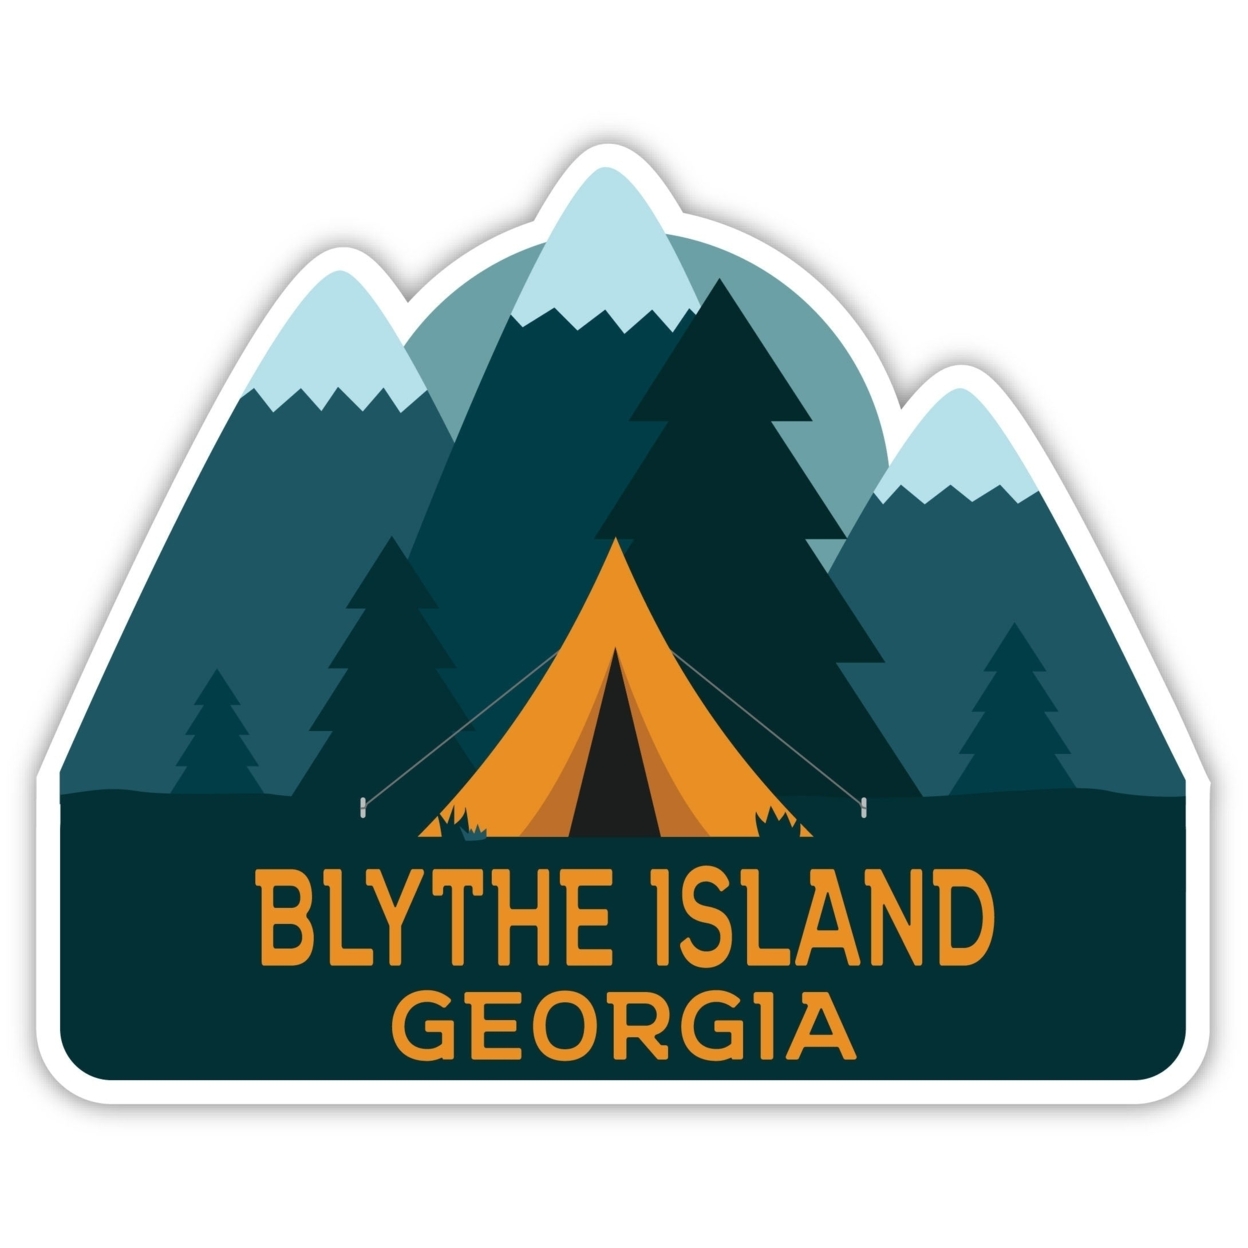 Blythe Island Georgia Souvenir Decorative Stickers (Choose Theme And Size) - 4-Pack, 2-Inch, Tent